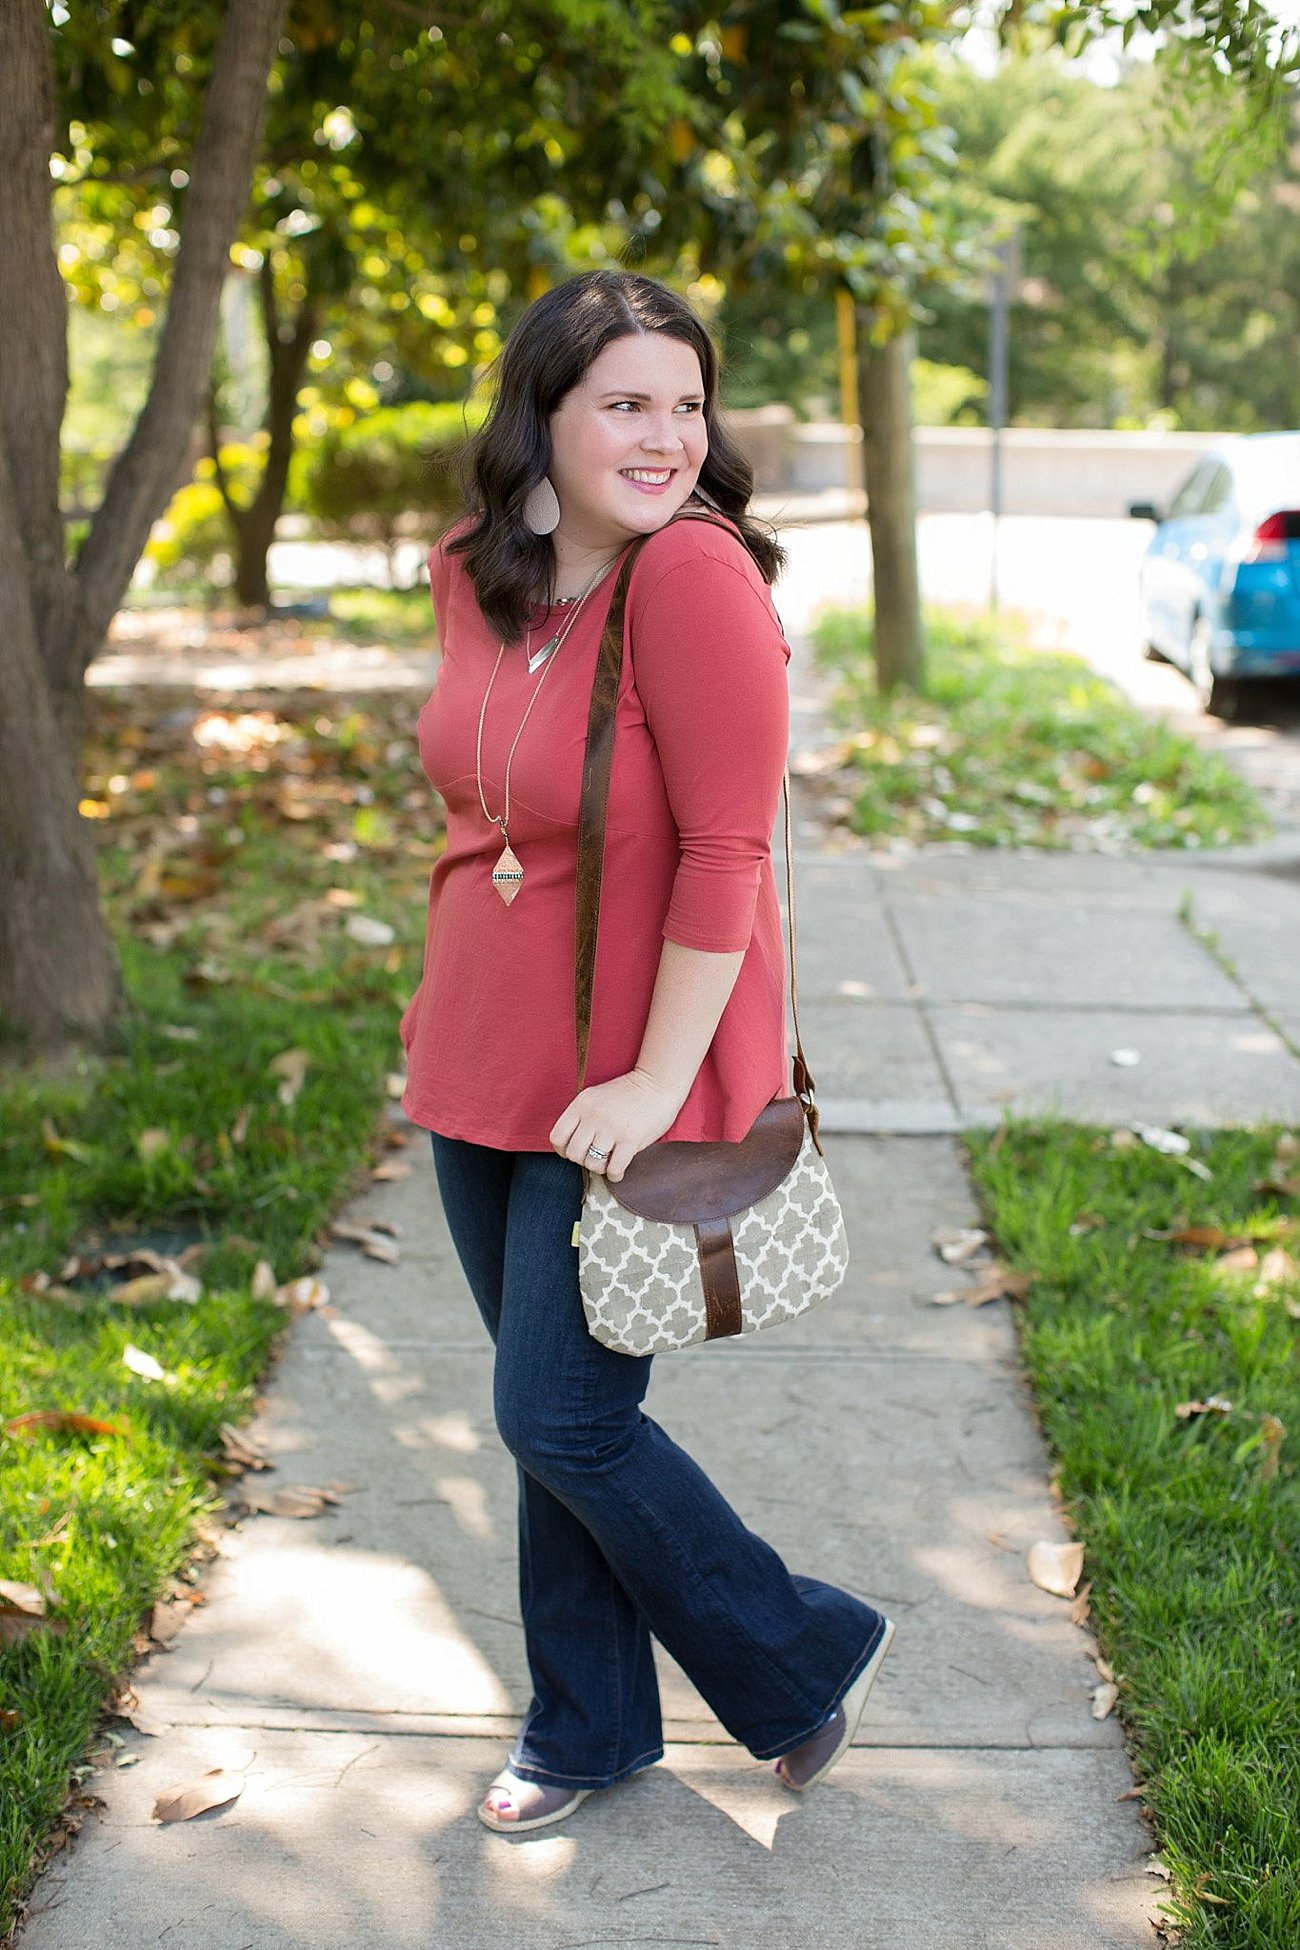 Elegantees Claire Top, Flare Jeans, JOYN bag, TOMS wedges, Nakamol Stitch Fix necklace | Ethical Fashion & Style Blogger (6)